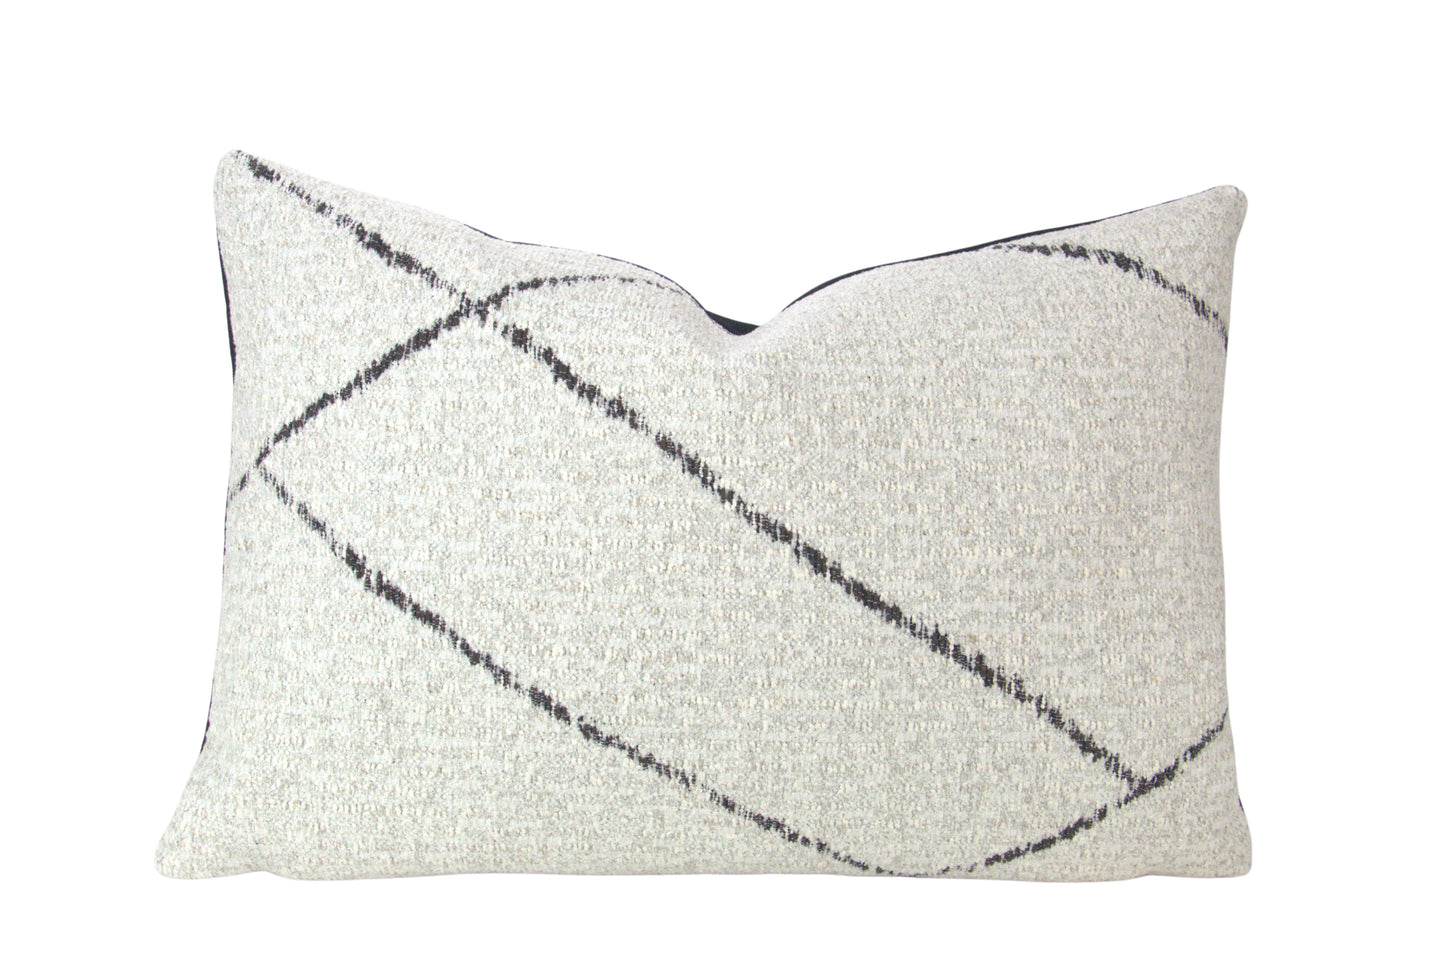 White & Black Moroccan Inspired Pillow Cover, lumbar